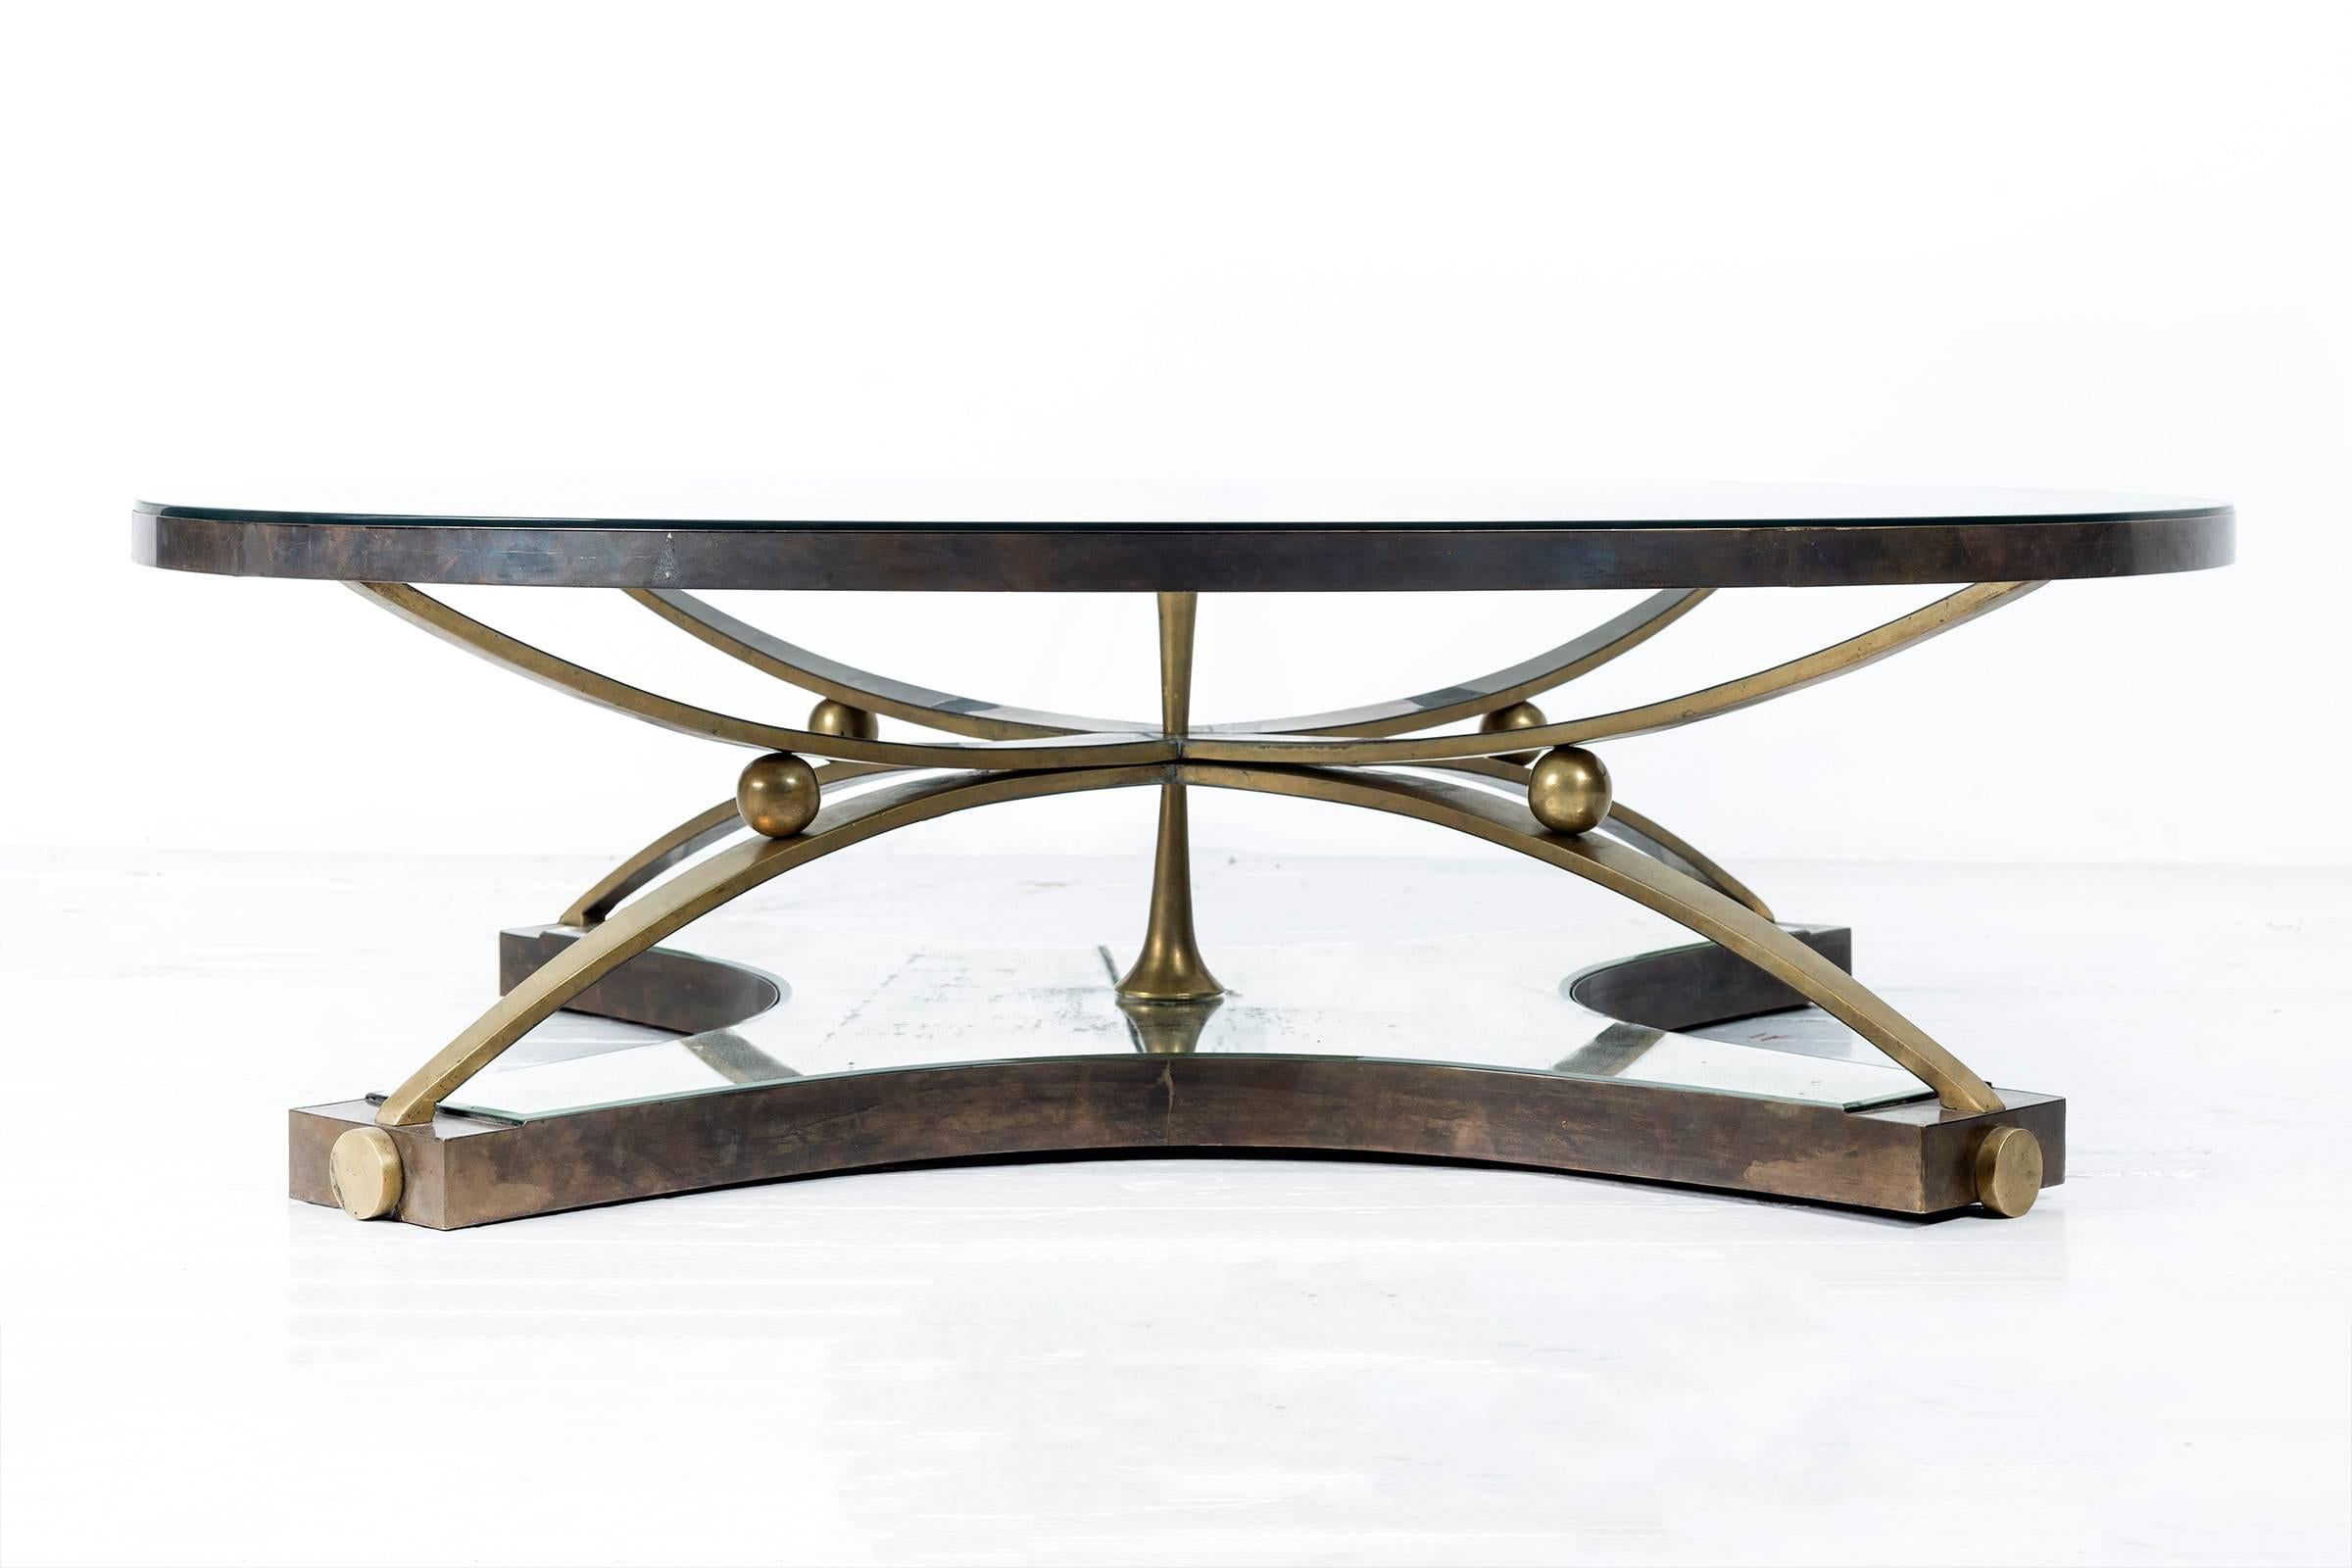 Round glass coffee table raised on sculptural patinated bronze legs,
supported by a mirror-clad bronze cruciform base.
Executed by Talleres Chacon. 
Mexico City, Mexico, c. 1960